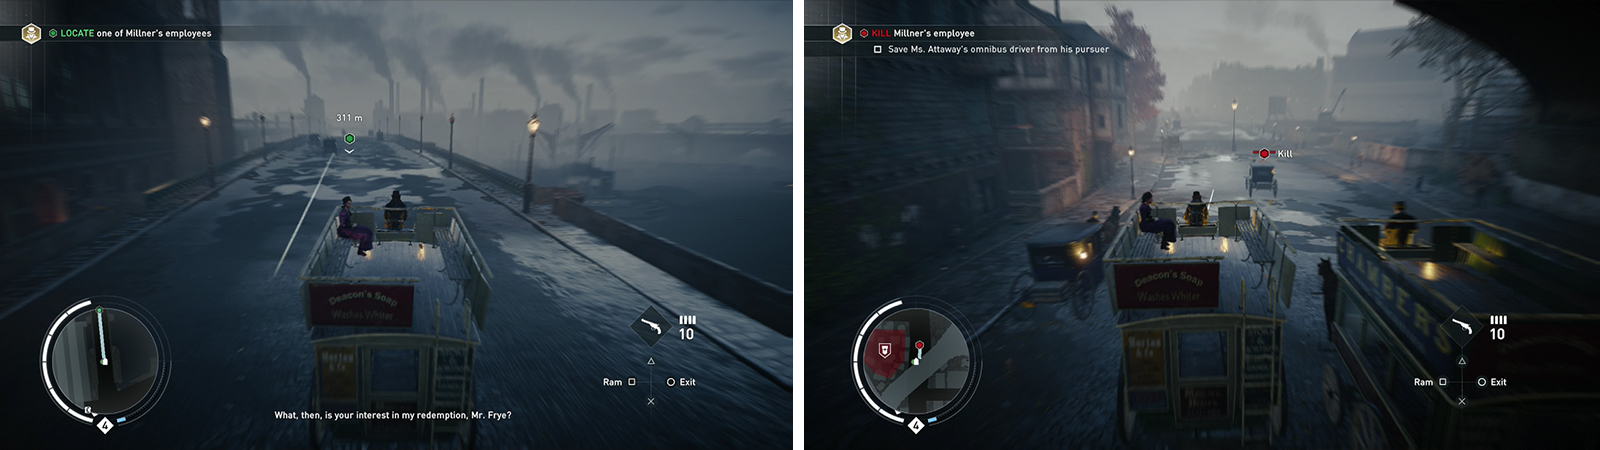 Cross the bridge (left) and then take out the hostile carriage attacking the onmnibus (right).